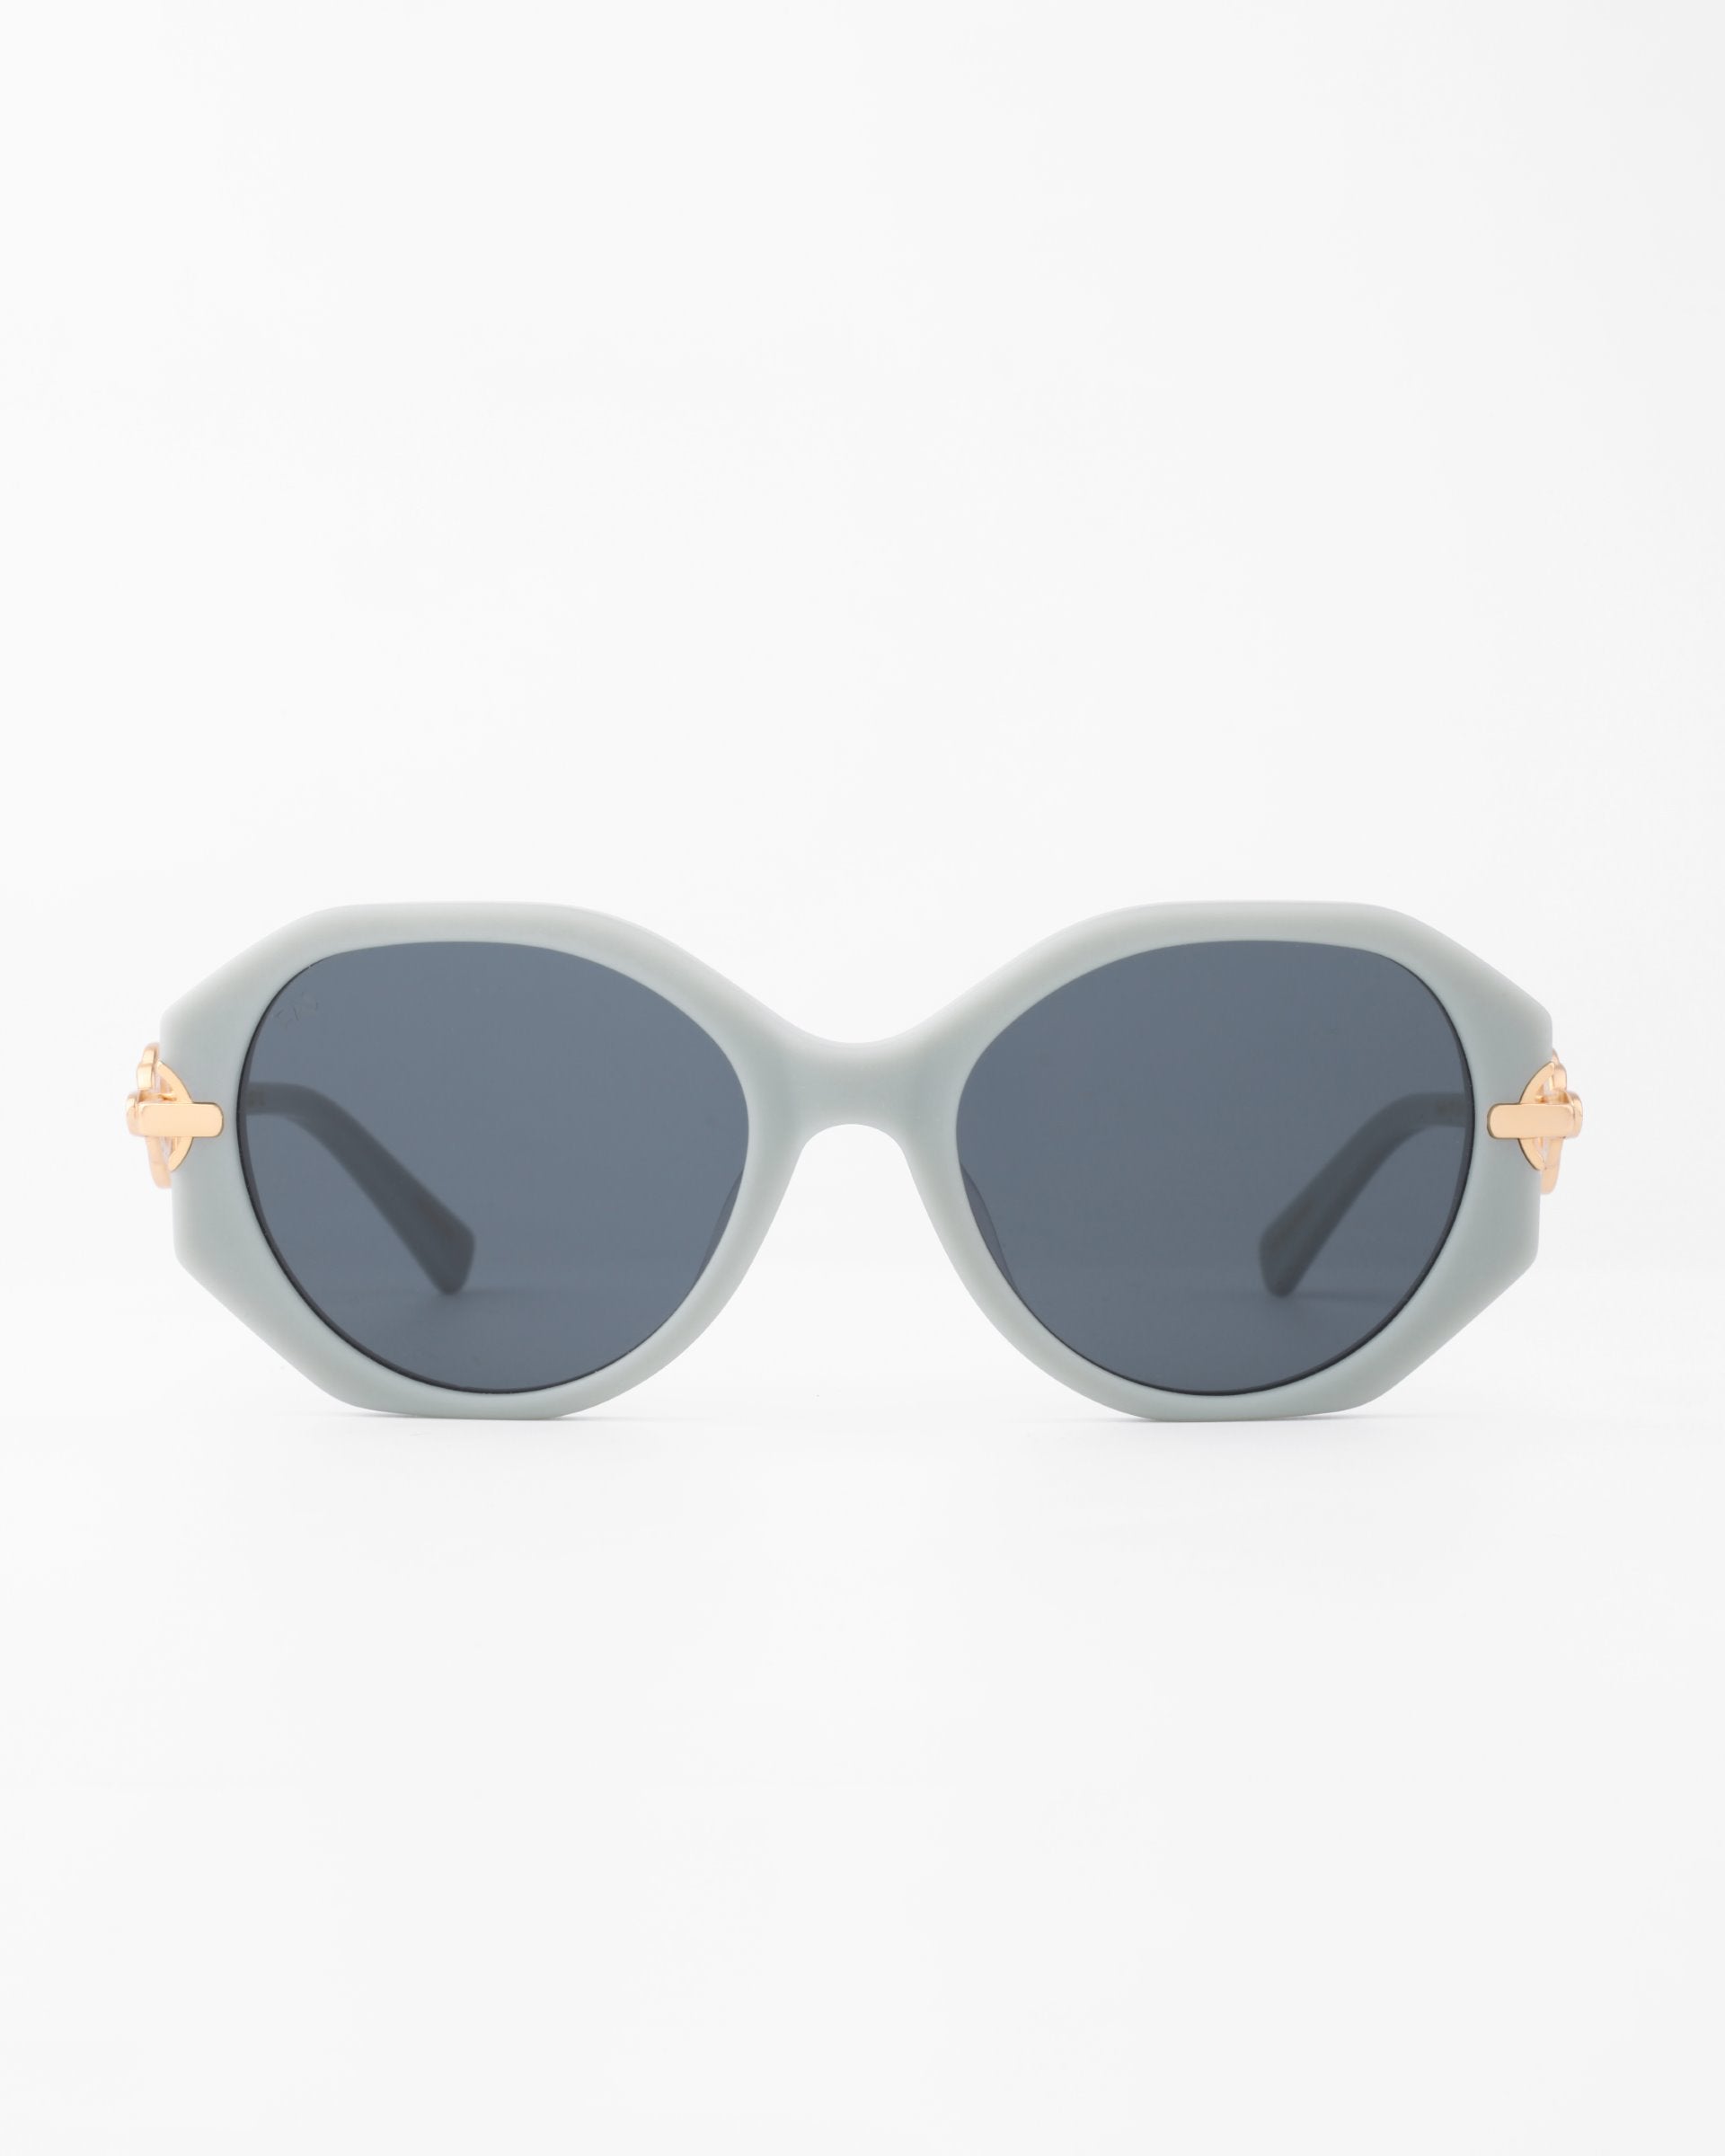 A pair of light gray oval-shaped Seaside sunglasses by For Art's Sake® with dark blue, shatter-resistant lenses. The handmade acetate frame features gold-plated temple detailing on a plain white background.